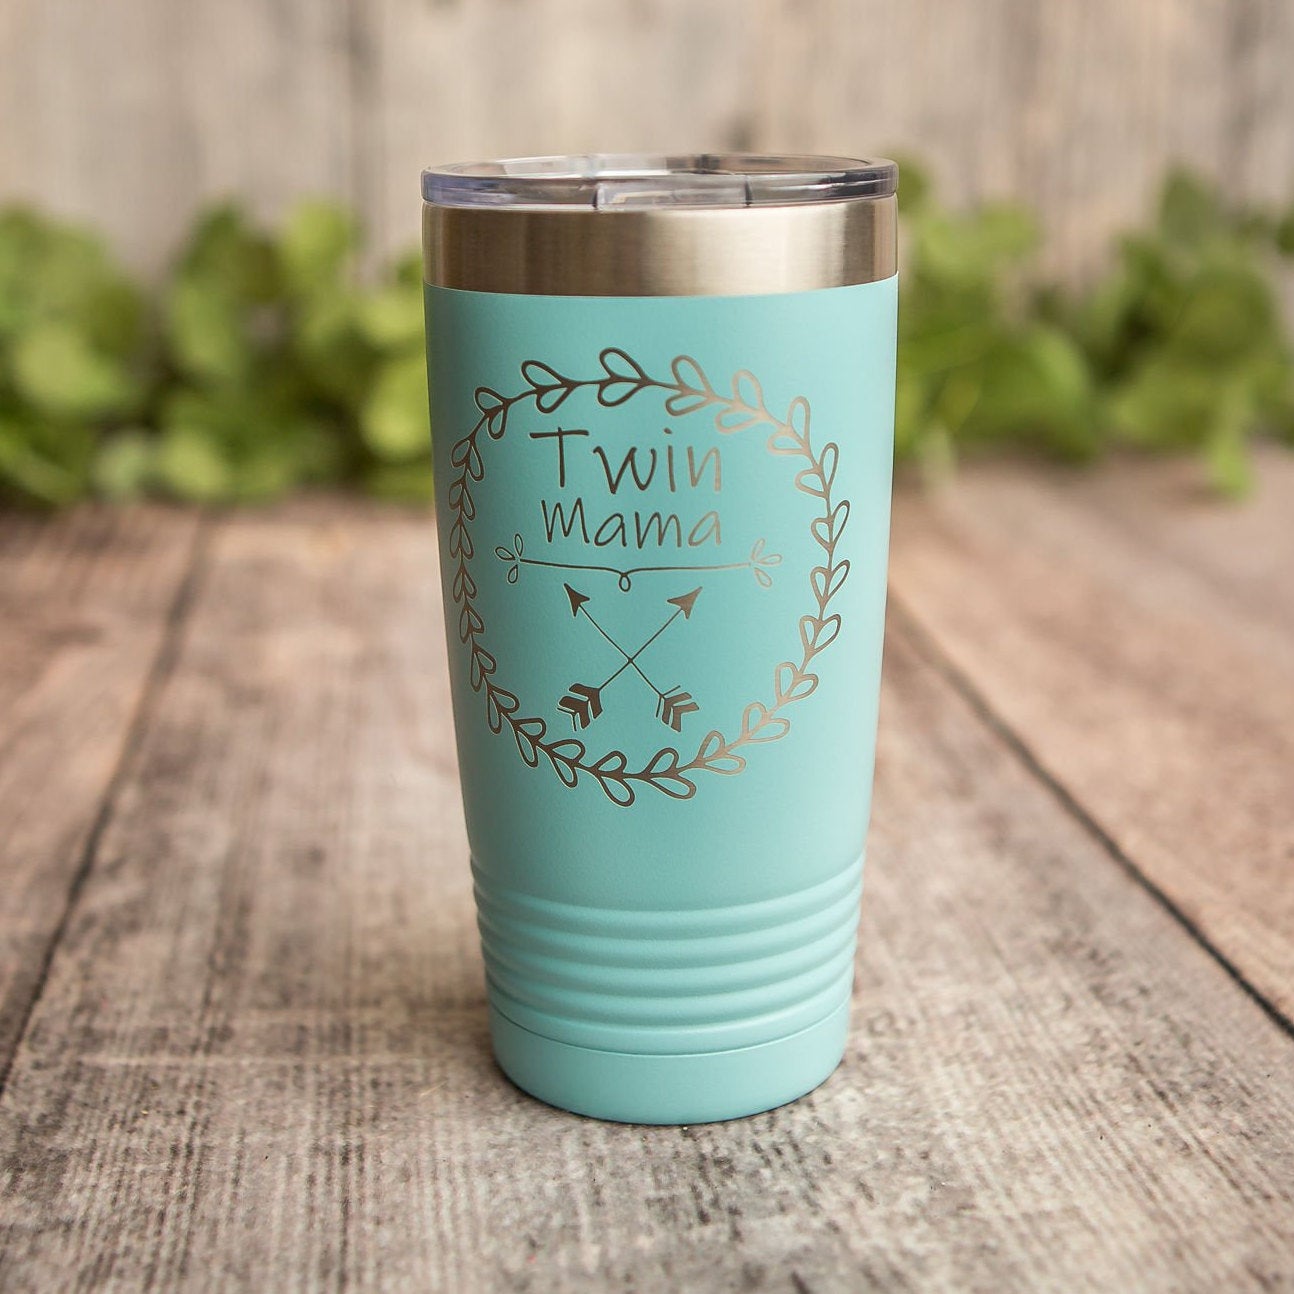 Stainless Steel Tumblers - Wholesale Tumblers - Mother Tumbler